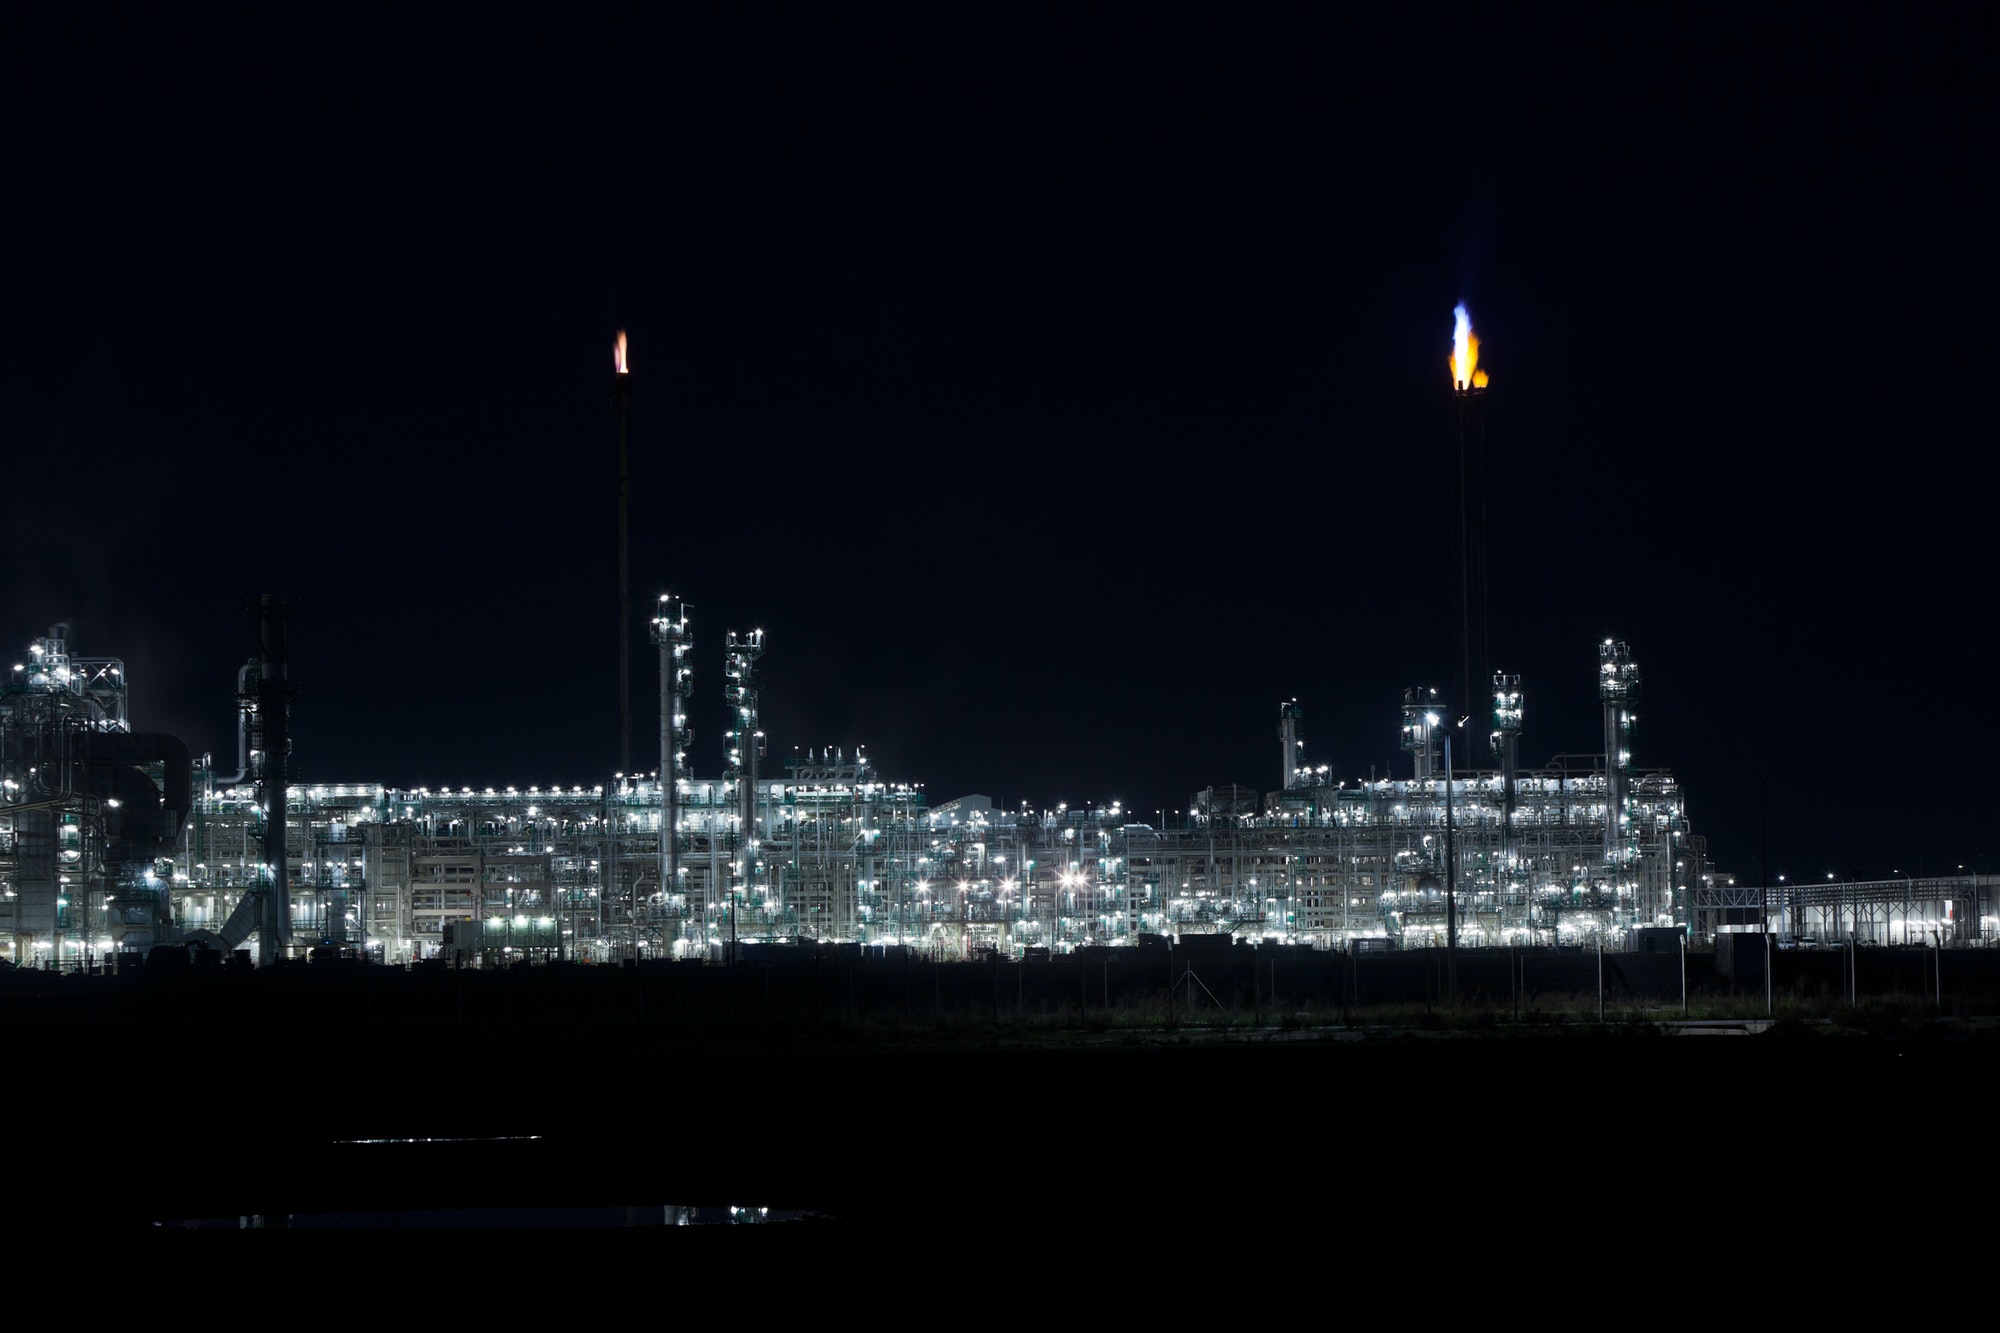 Night View of an Oil Refinery Plant